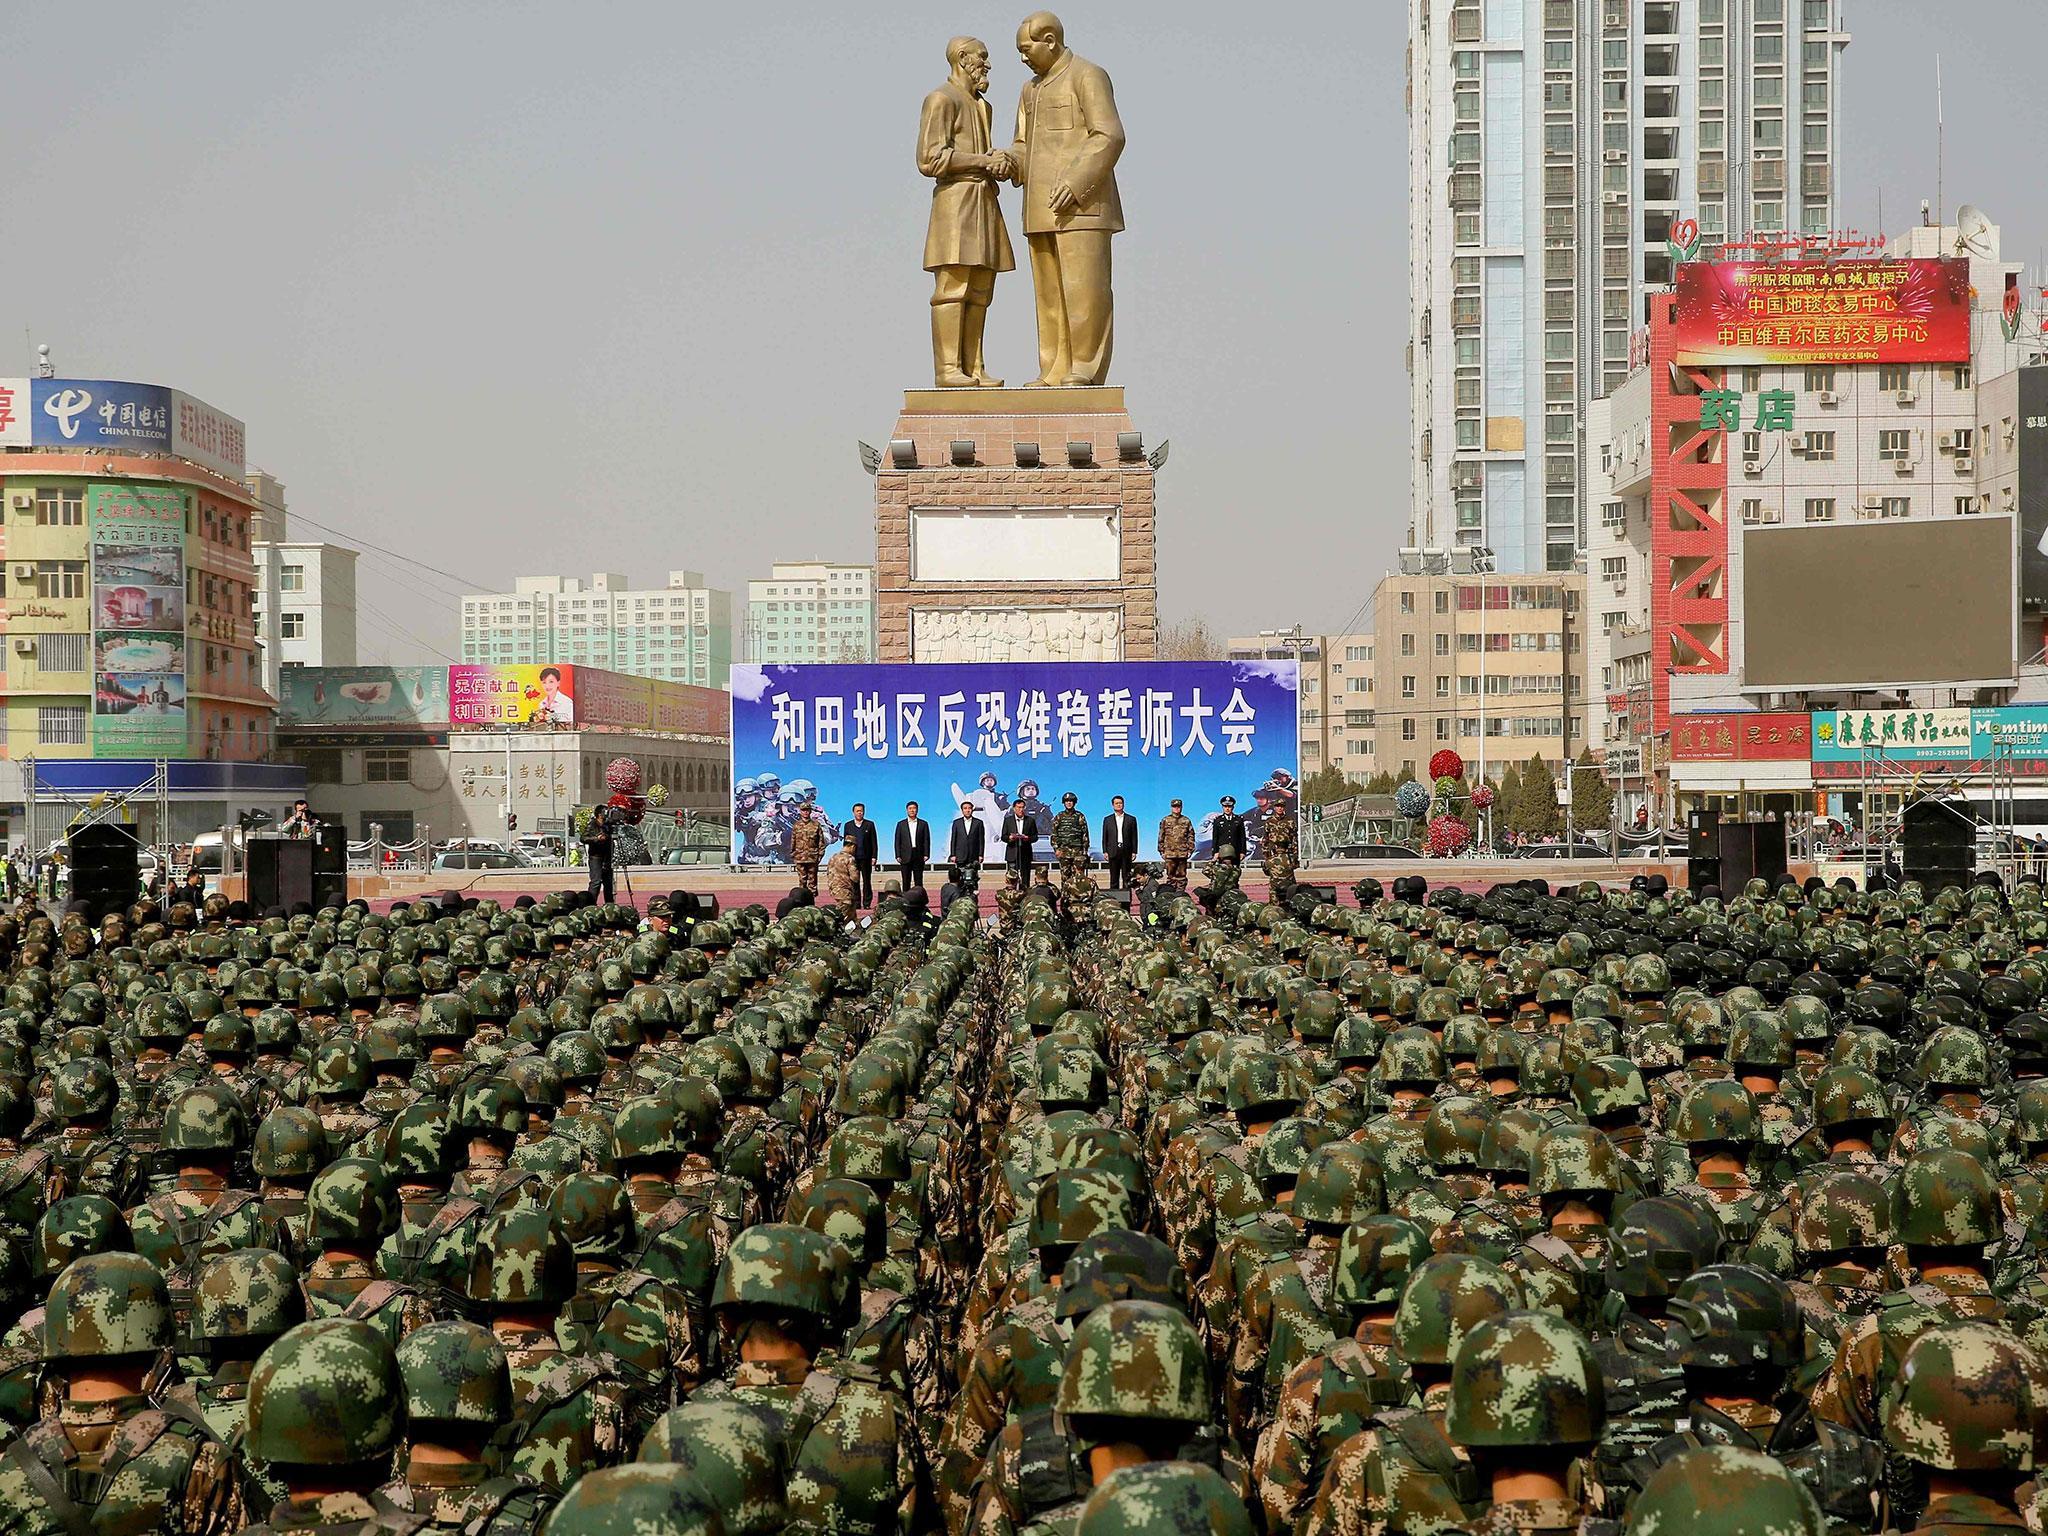 Chinese military police attending an anti-terrorist oath-taking rally in northwest China's Xinjiang province